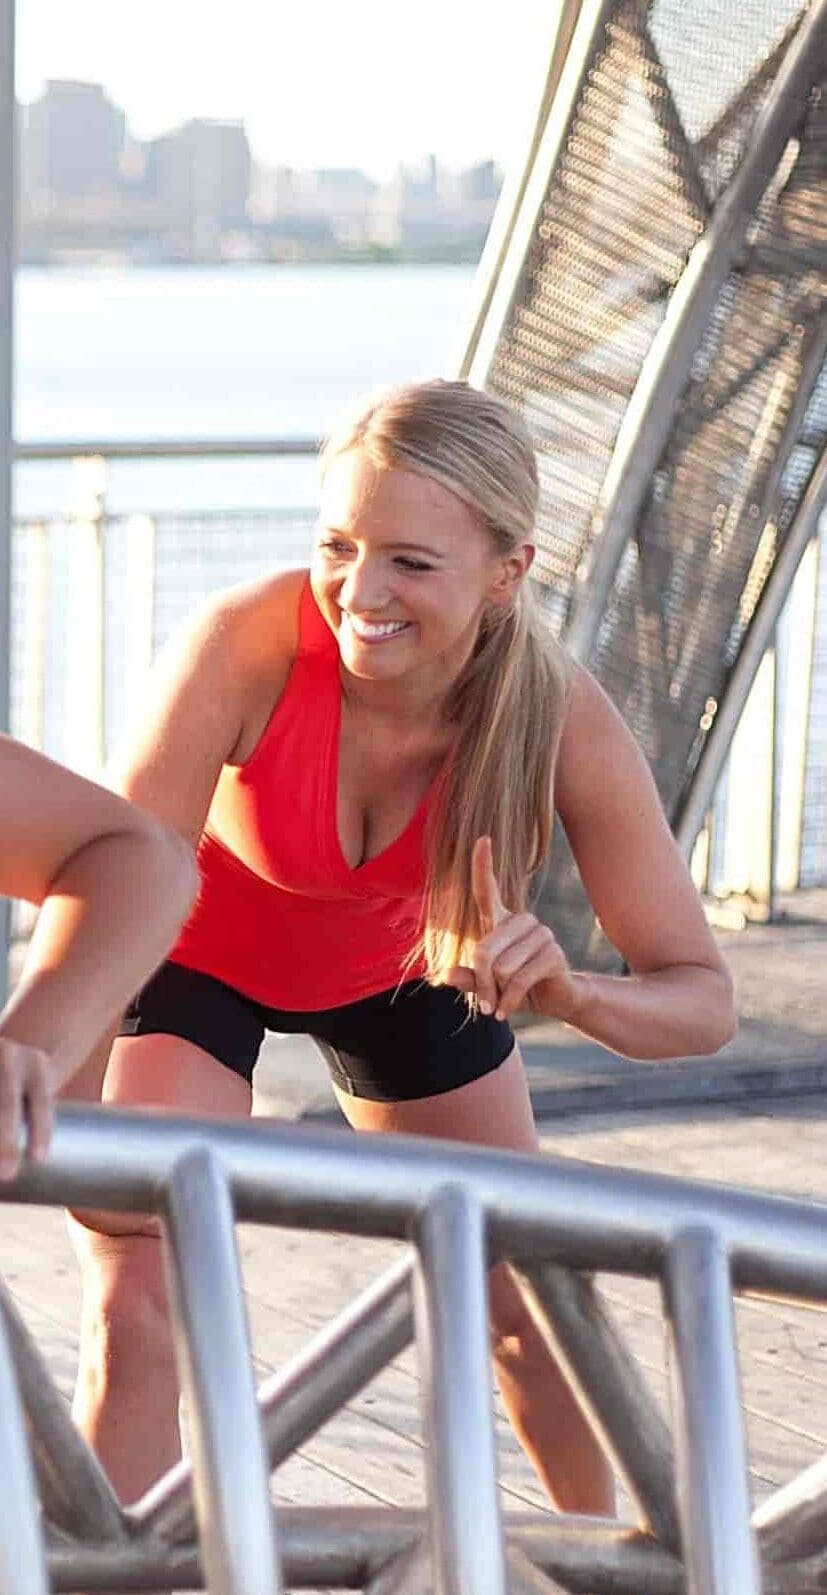 Holly is the owner of Holly Roser Fitness Studio in San Mateo, CA where she and her team of private trainers teach her signature H-Method in person and online.